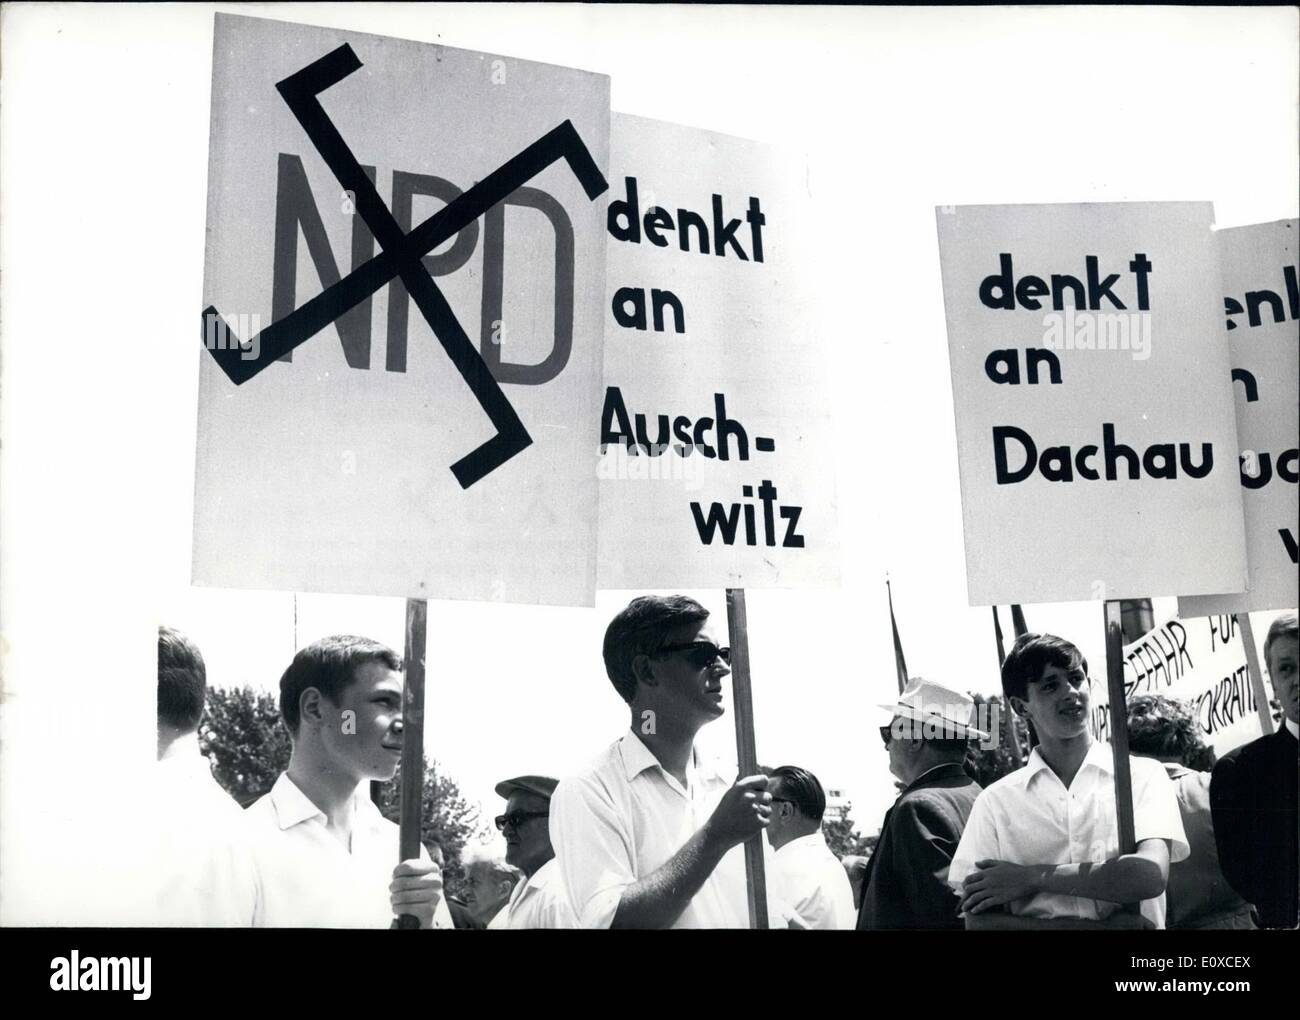 Jun. 06, 1966 - NDP-meeting in Karlsruhe: From Junbe 17th till June 19th, 1966 the Second Federal Party Meeting of the NPD (National Democratic party of Germany) takes place in Kerlsruhe inspite of extensive protest-actions of SPD (Social Democratic Party of Germany), the trade-union and the mubnicipal government of Karlshruhe. In opposition of 4000 NPD-members about 20000 members of the SPD and trade-union arrived Karlsruhe on June 17th in order to make demonstrations against the NPD-party-meeting. Photo shows Demonstrators with transparencies with paroles against the NPD. Stock Photo